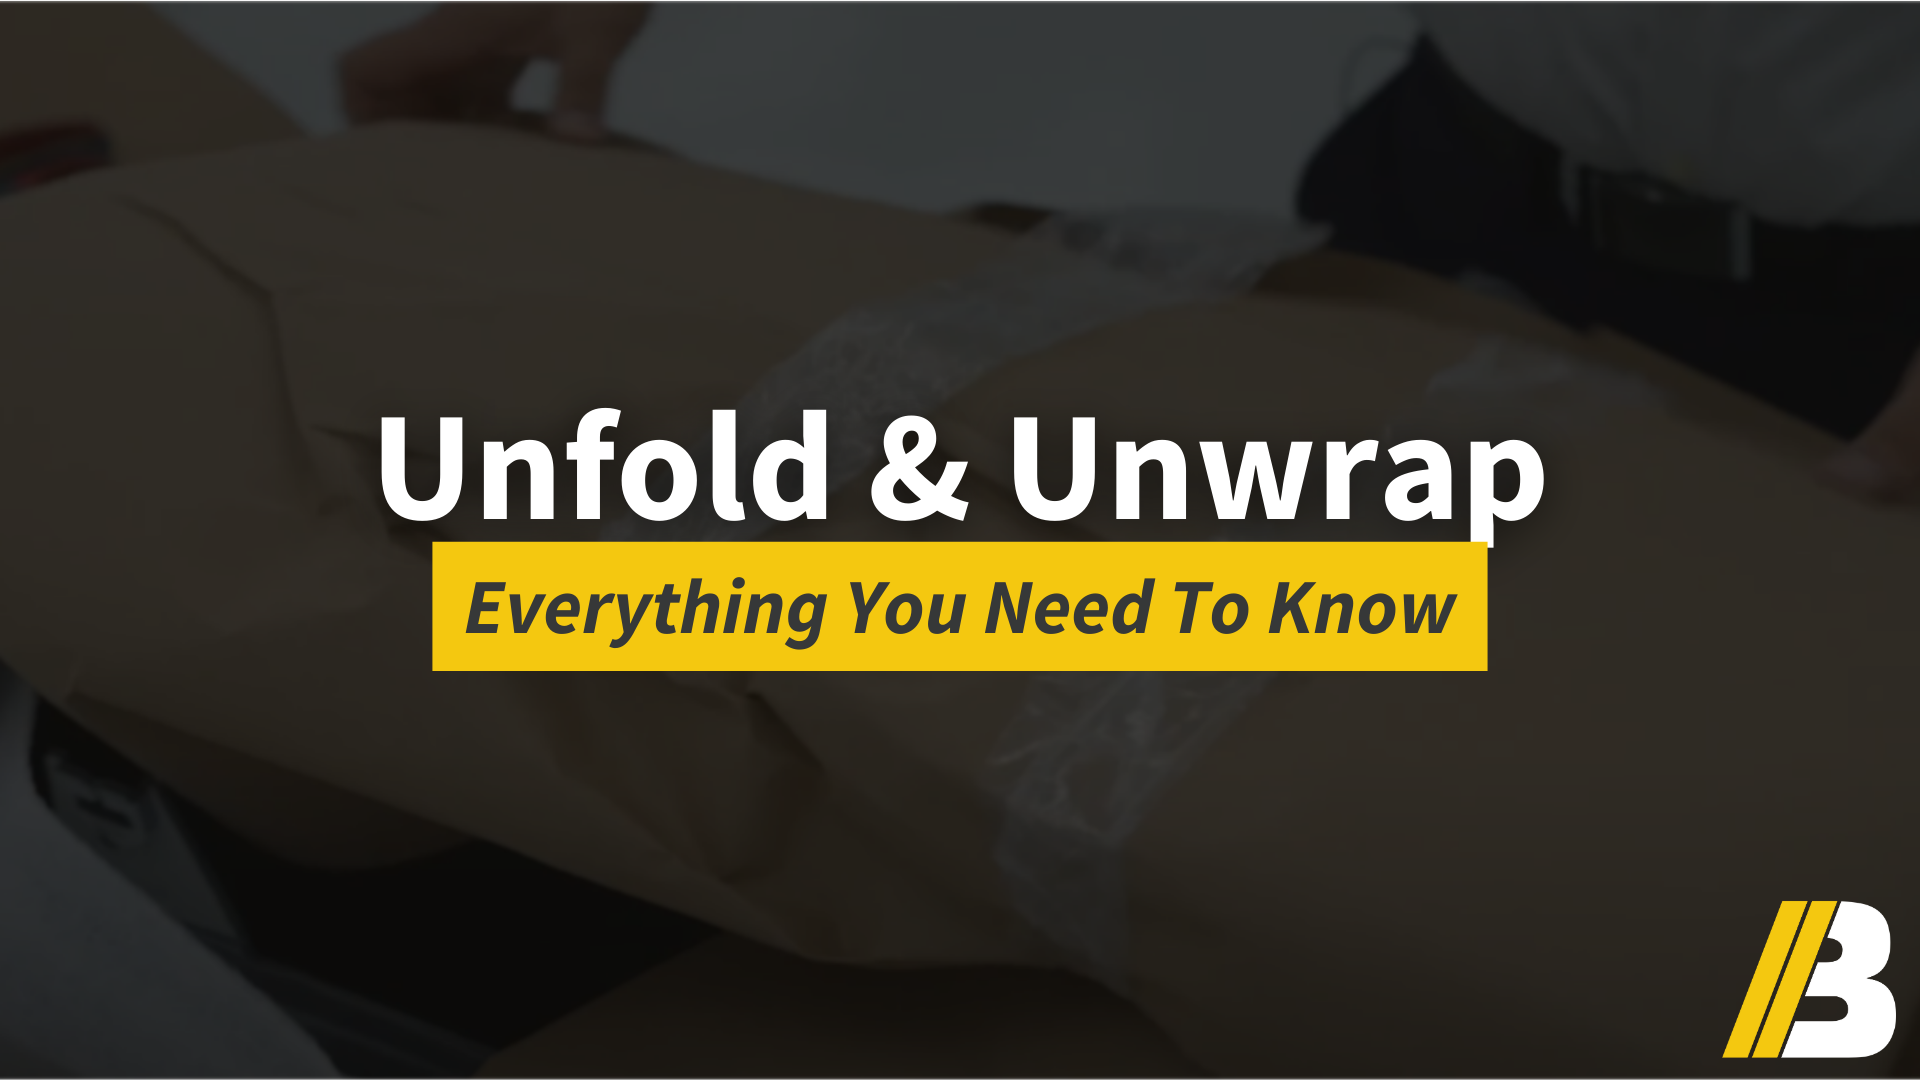 Unfold & Unwrap: Everything You Need To Know